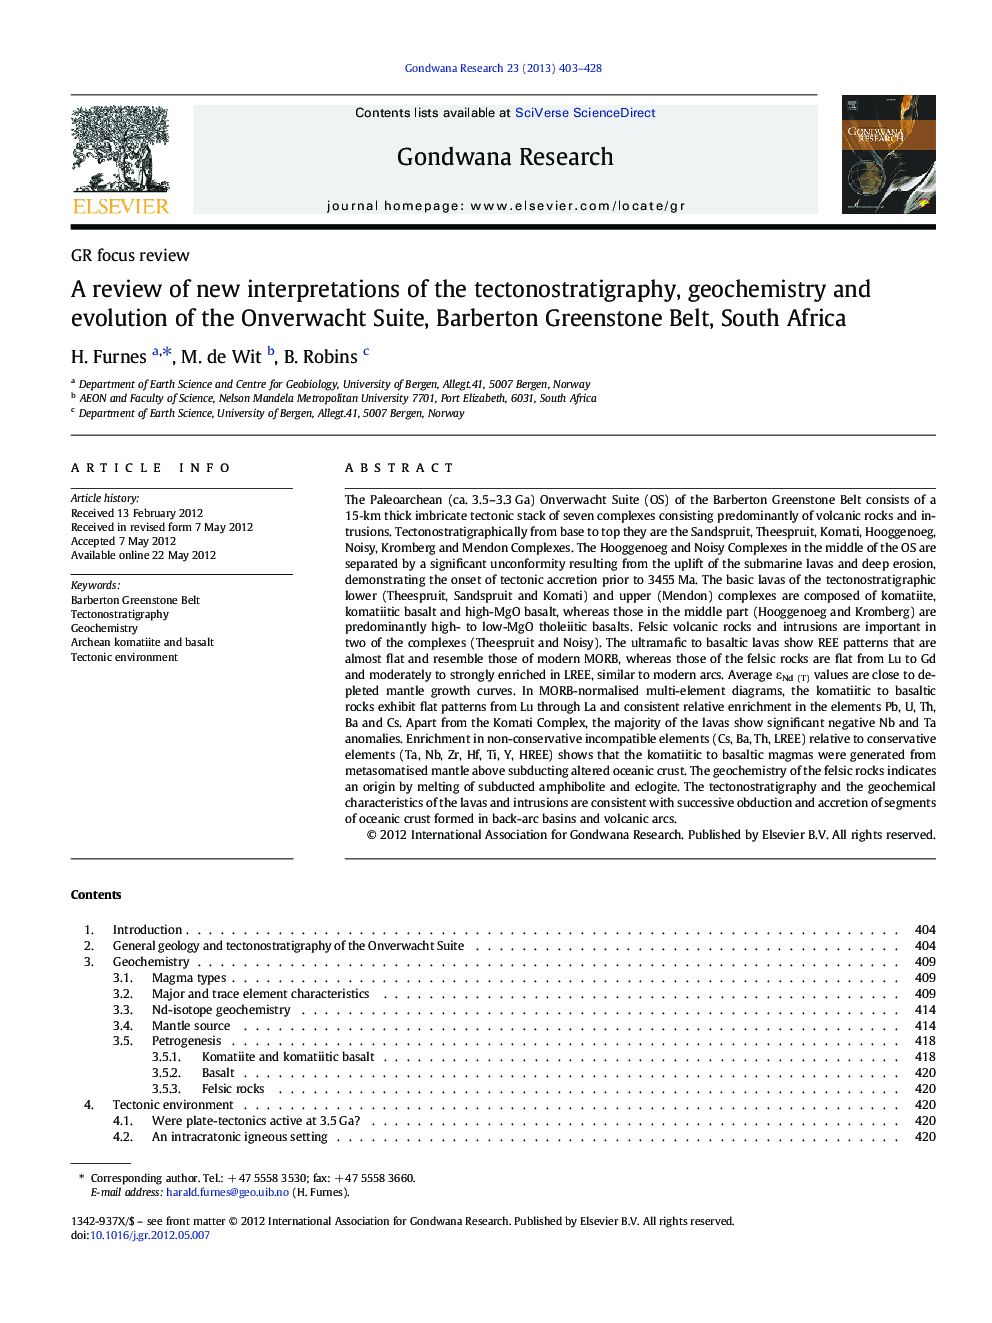 A review of new interpretations of the tectonostratigraphy, geochemistry and evolution of the Onverwacht Suite, Barberton Greenstone Belt, South Africa